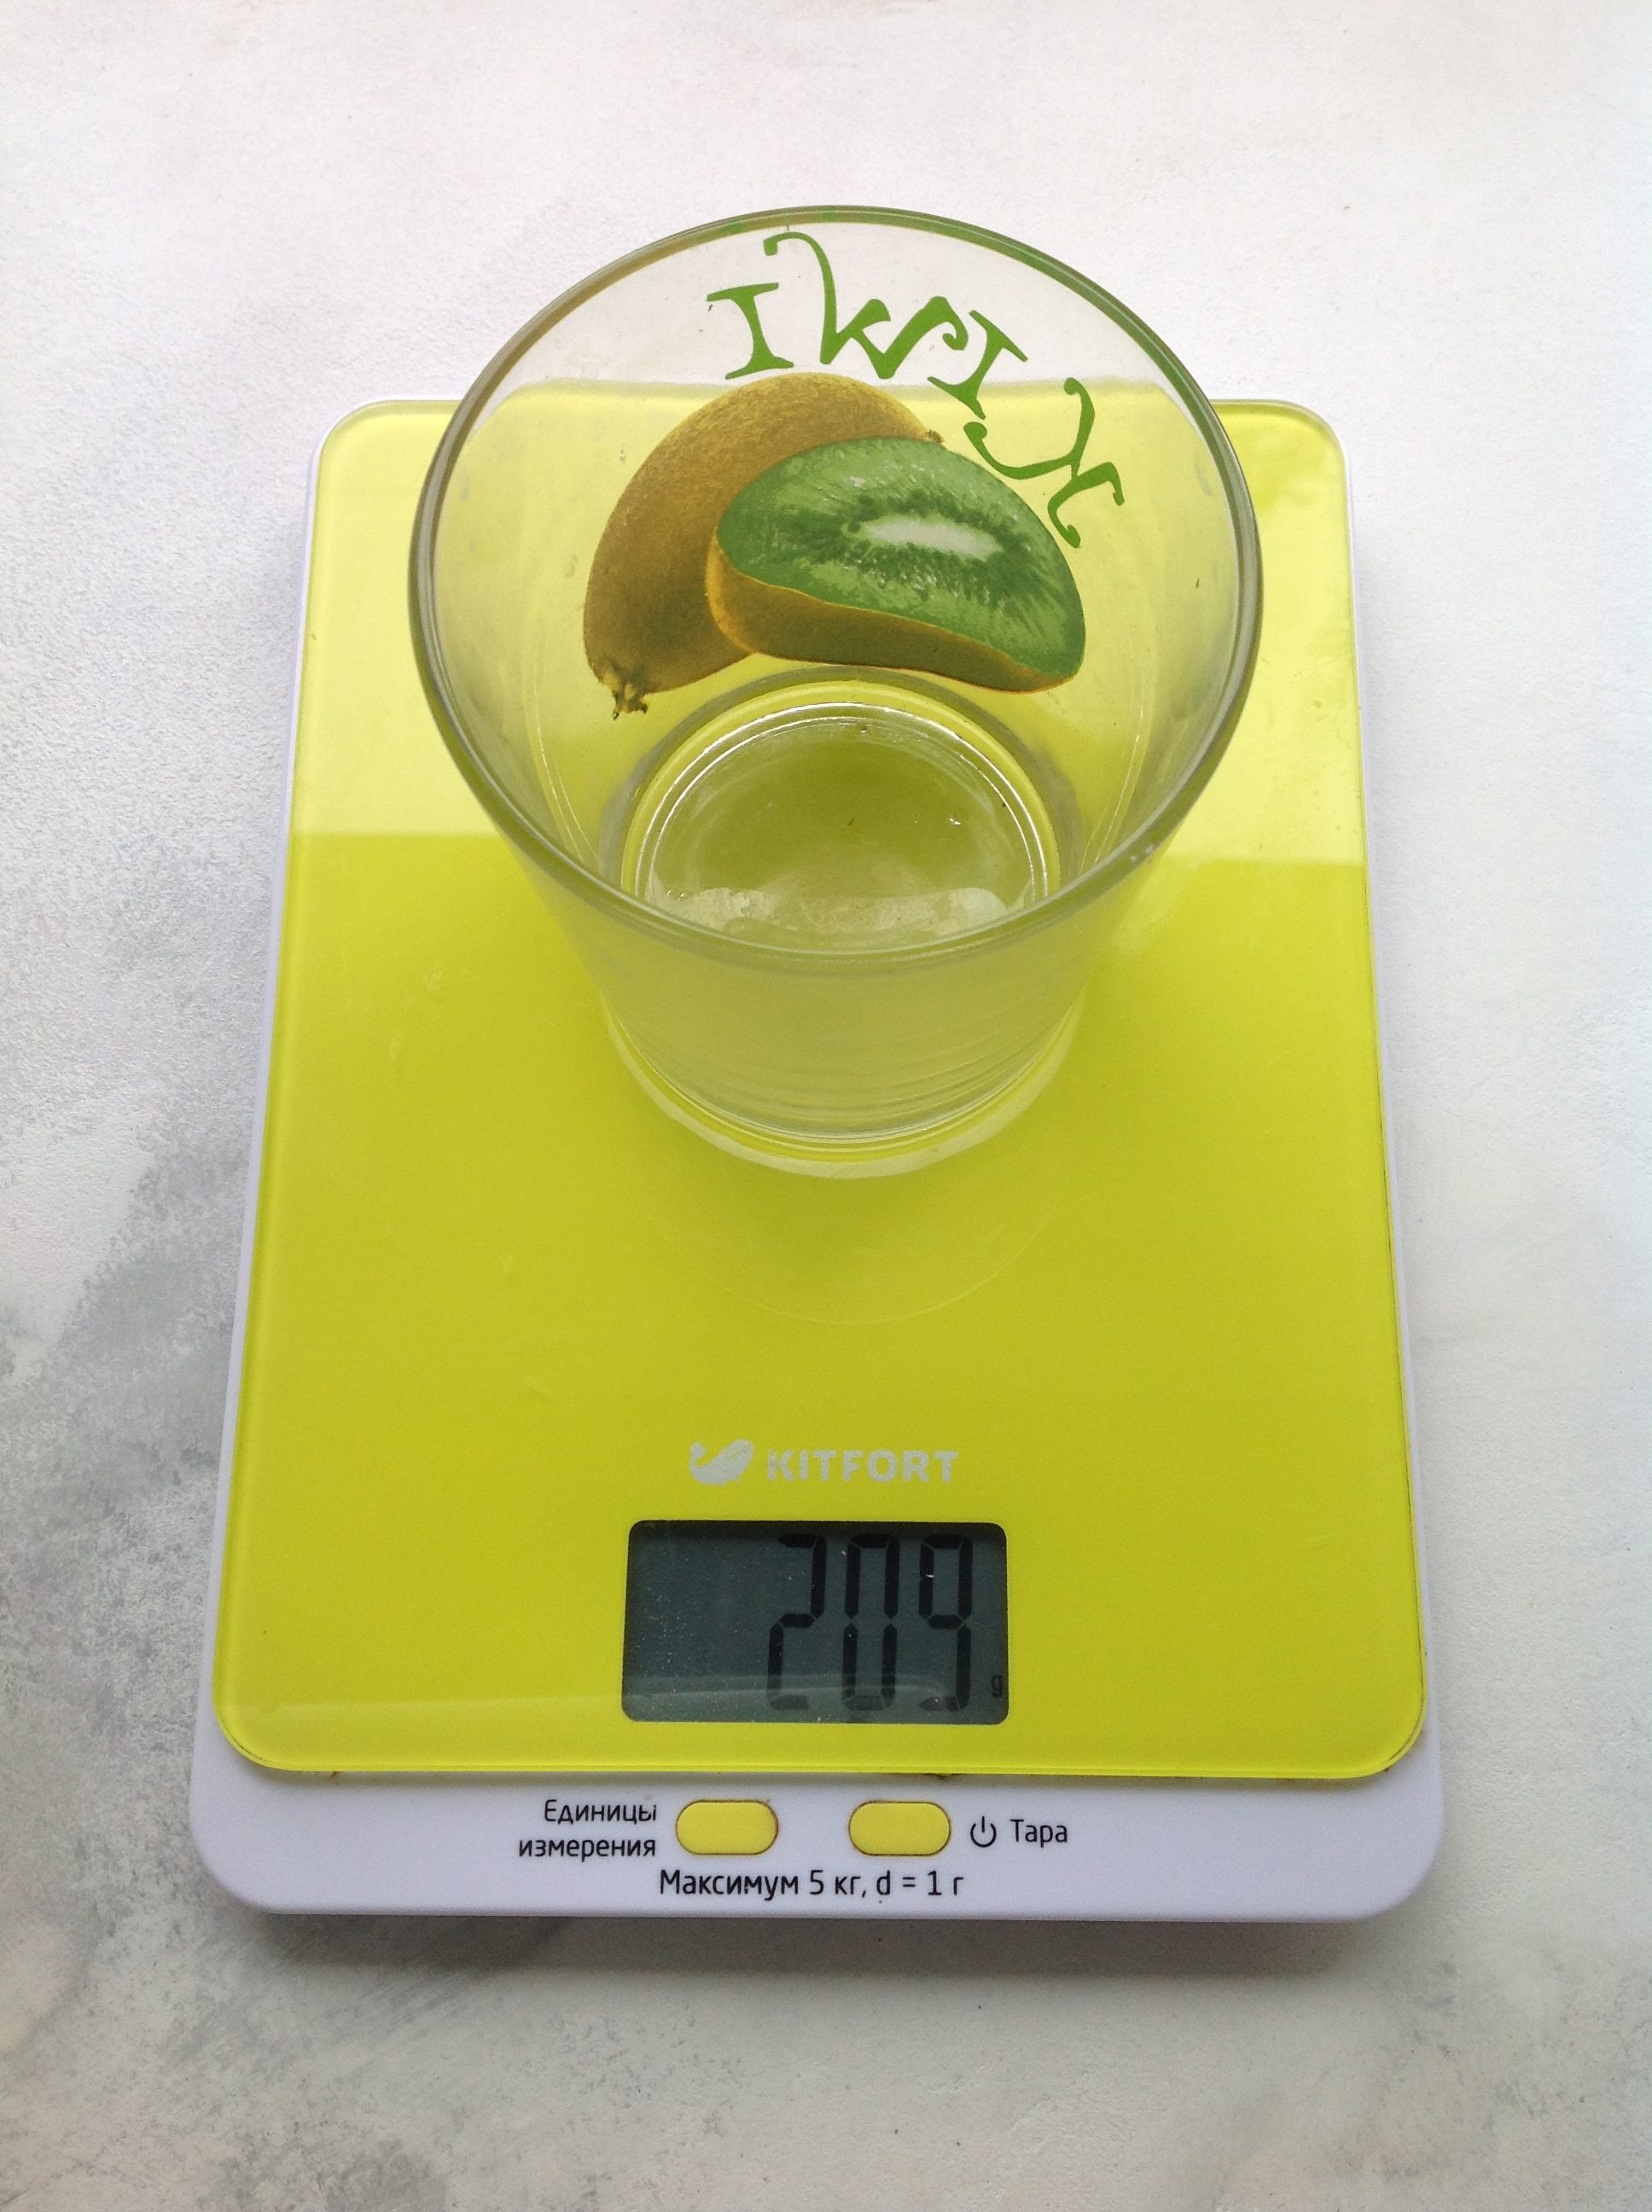 How much does a glass of 250 ml glass weigh?